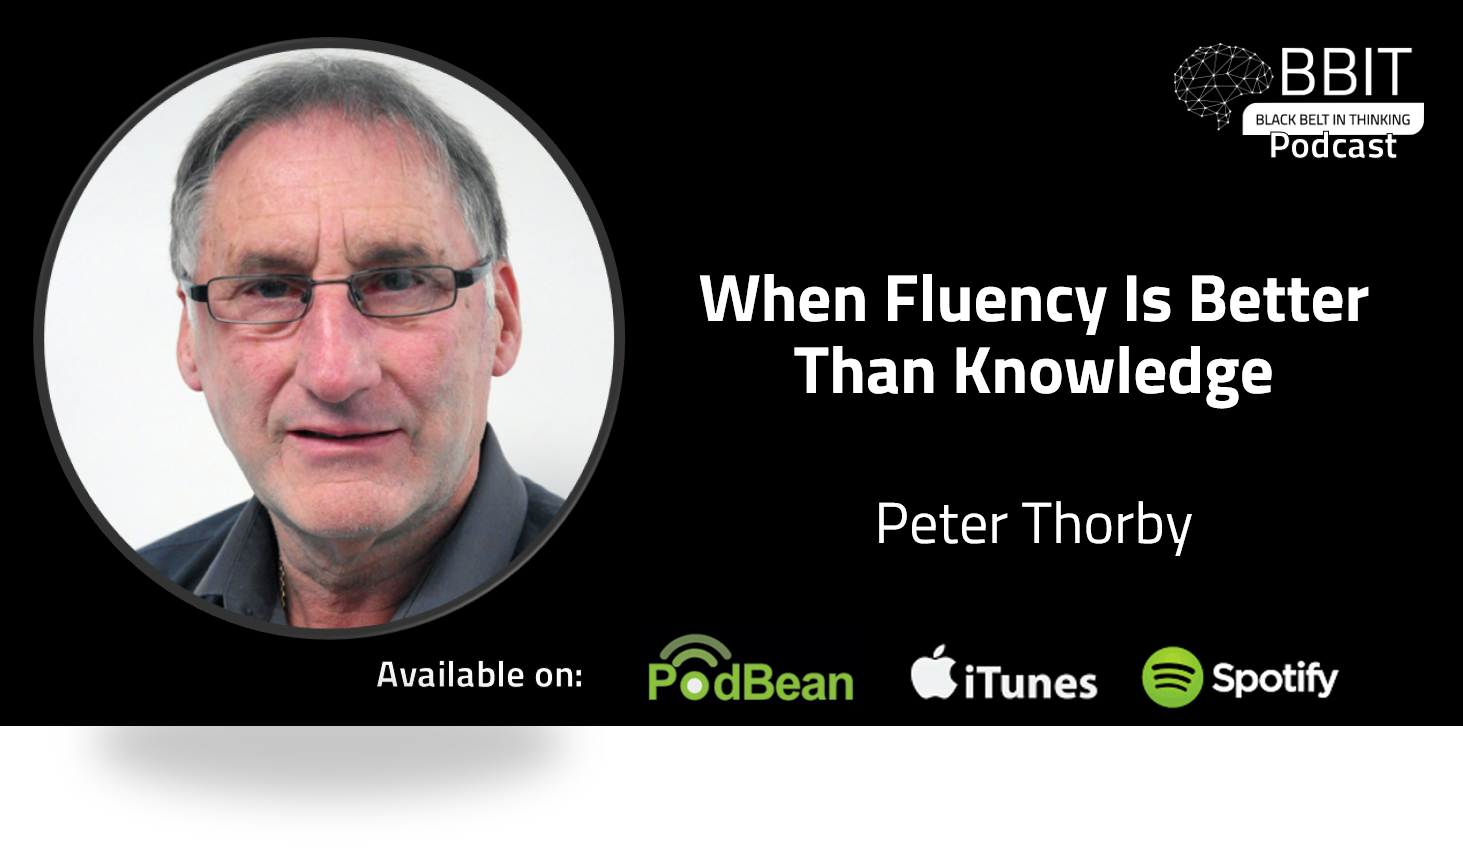 [Podcast] When Fluency is Better than Knowledge